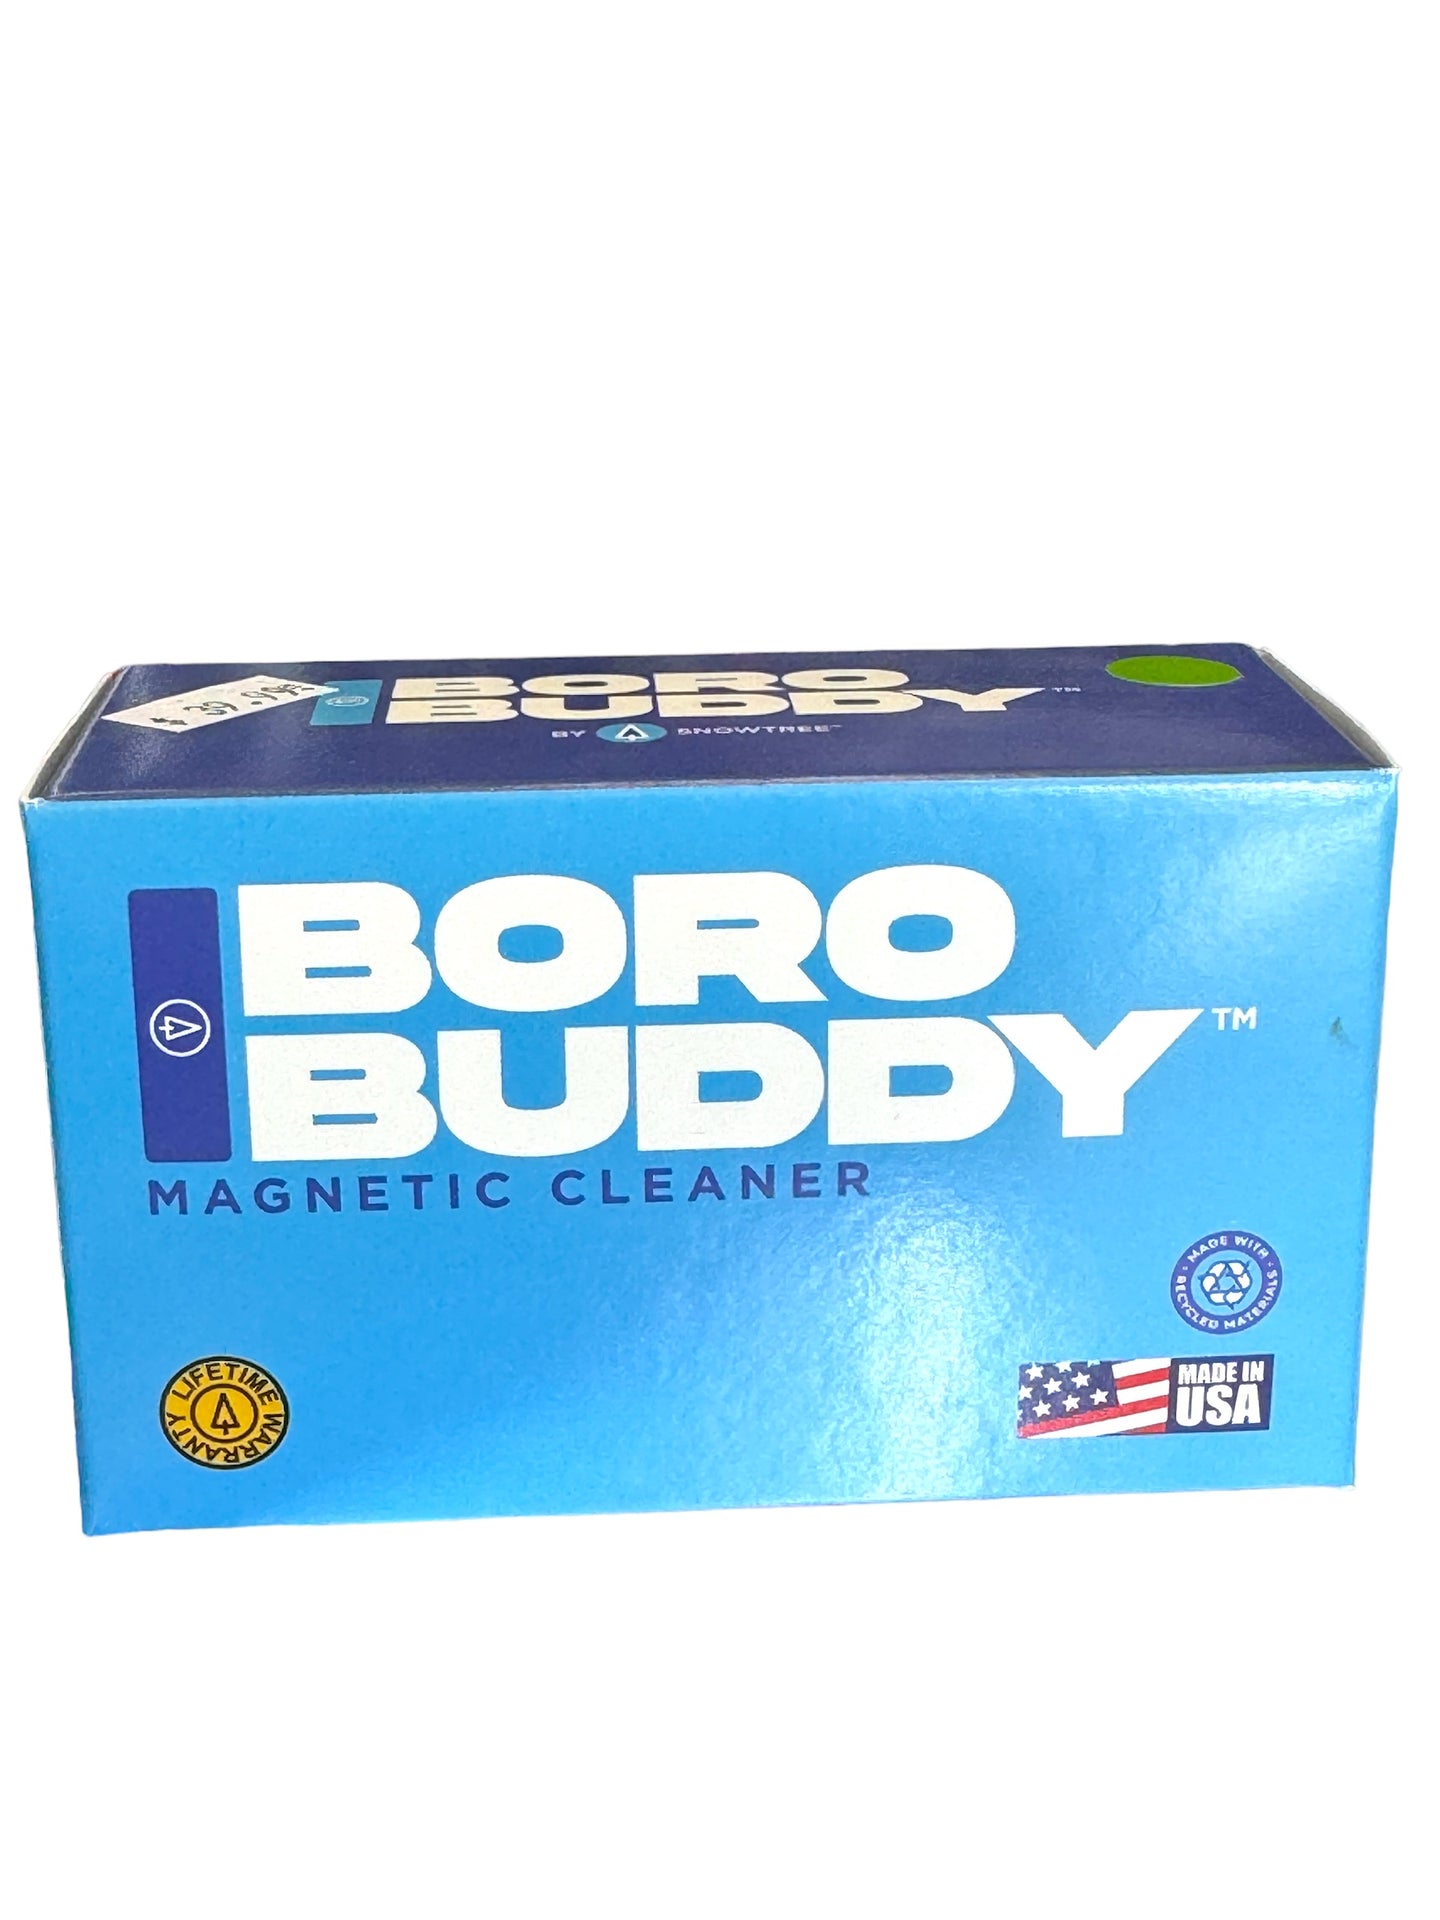 Boro Buddy Magnetic Cleaner